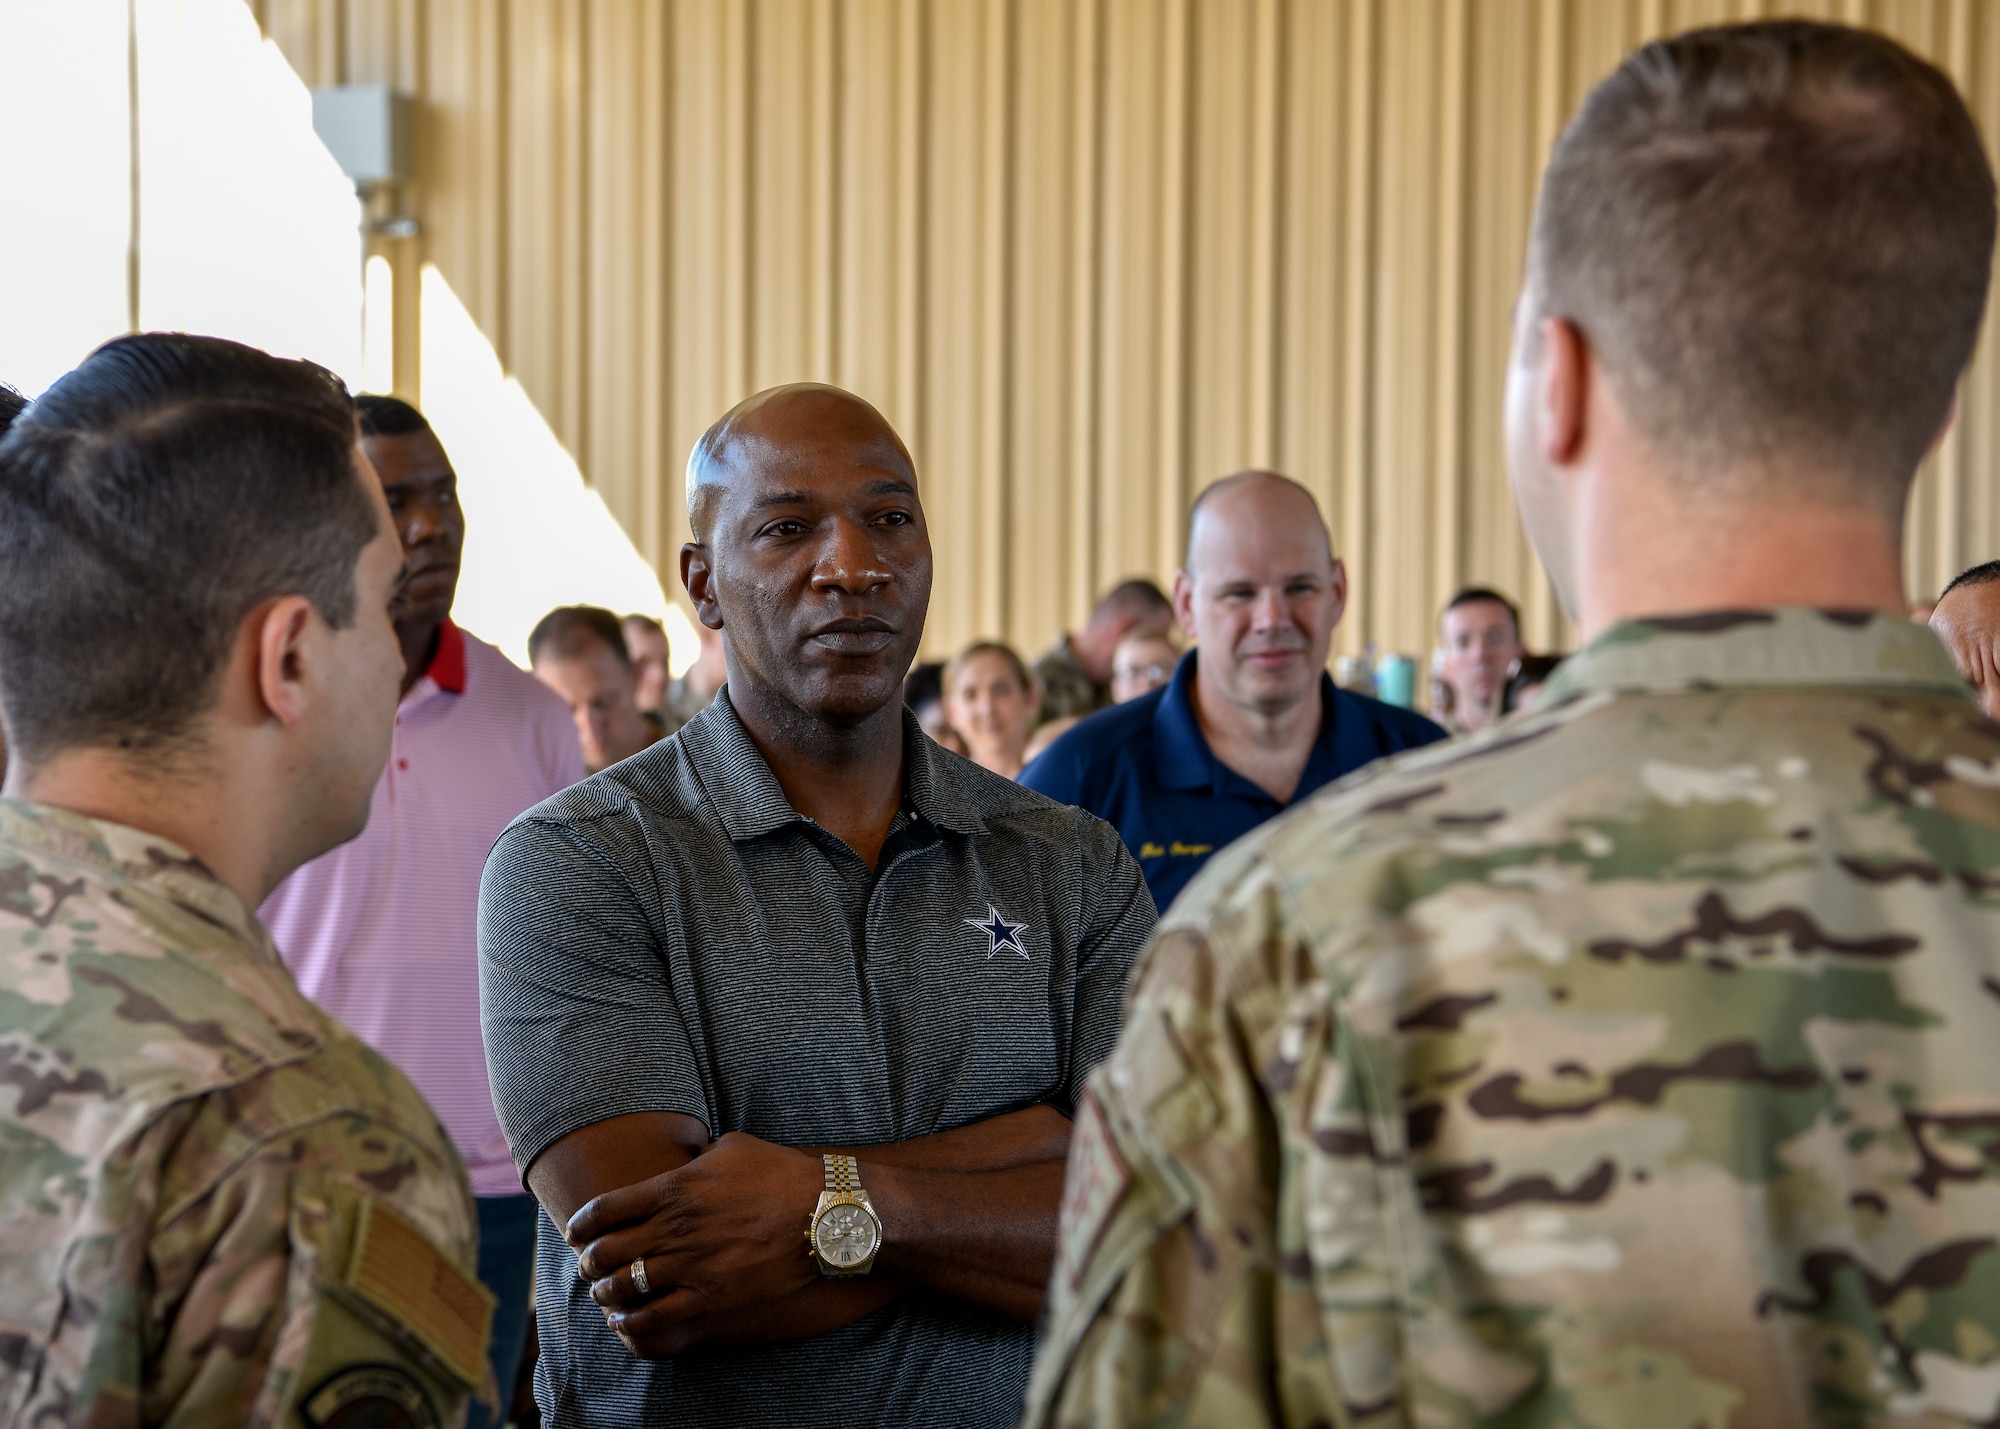 Chief Master Sgt. of the Air Force Kaleth O. Wright listens to the founding members of ‘Airman 4 Airman’ speak about the purpose of their group at Kirtland Air Force Base, N.M., Sept. 28, 2019. Airman 4 Airman is a group dedicated to increasing morale and speaking up for Airmen of all tiers around the world. (U.S. Air Force photo by Airman 1st Class Austin J. Prisbrey)